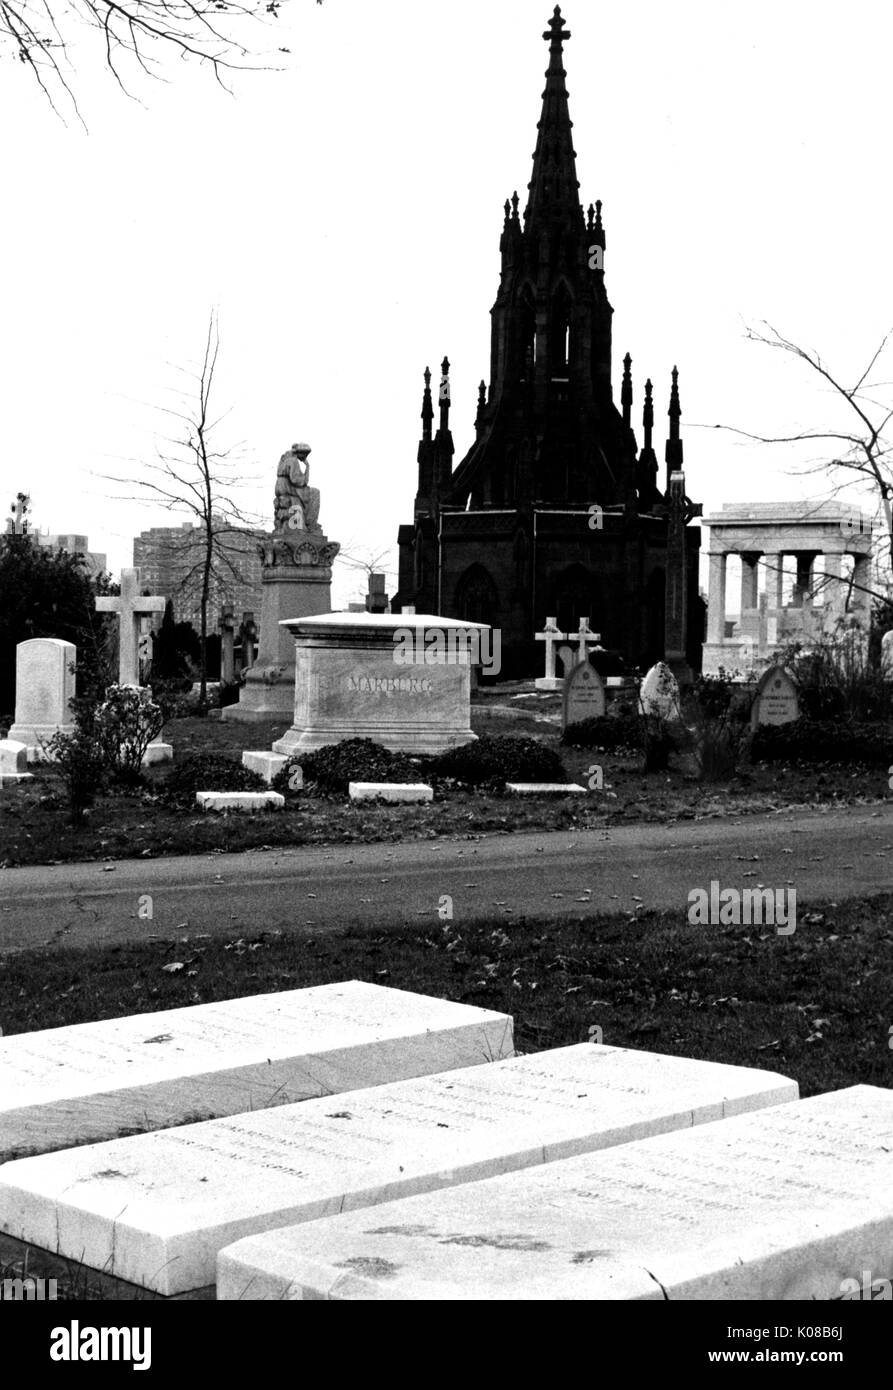 Photograph of Hopkinss tombstone in Greenmount Cemetery on 100th anniversary of his death, Baltimore, Maryland, December 24, 1973. Stock Photo